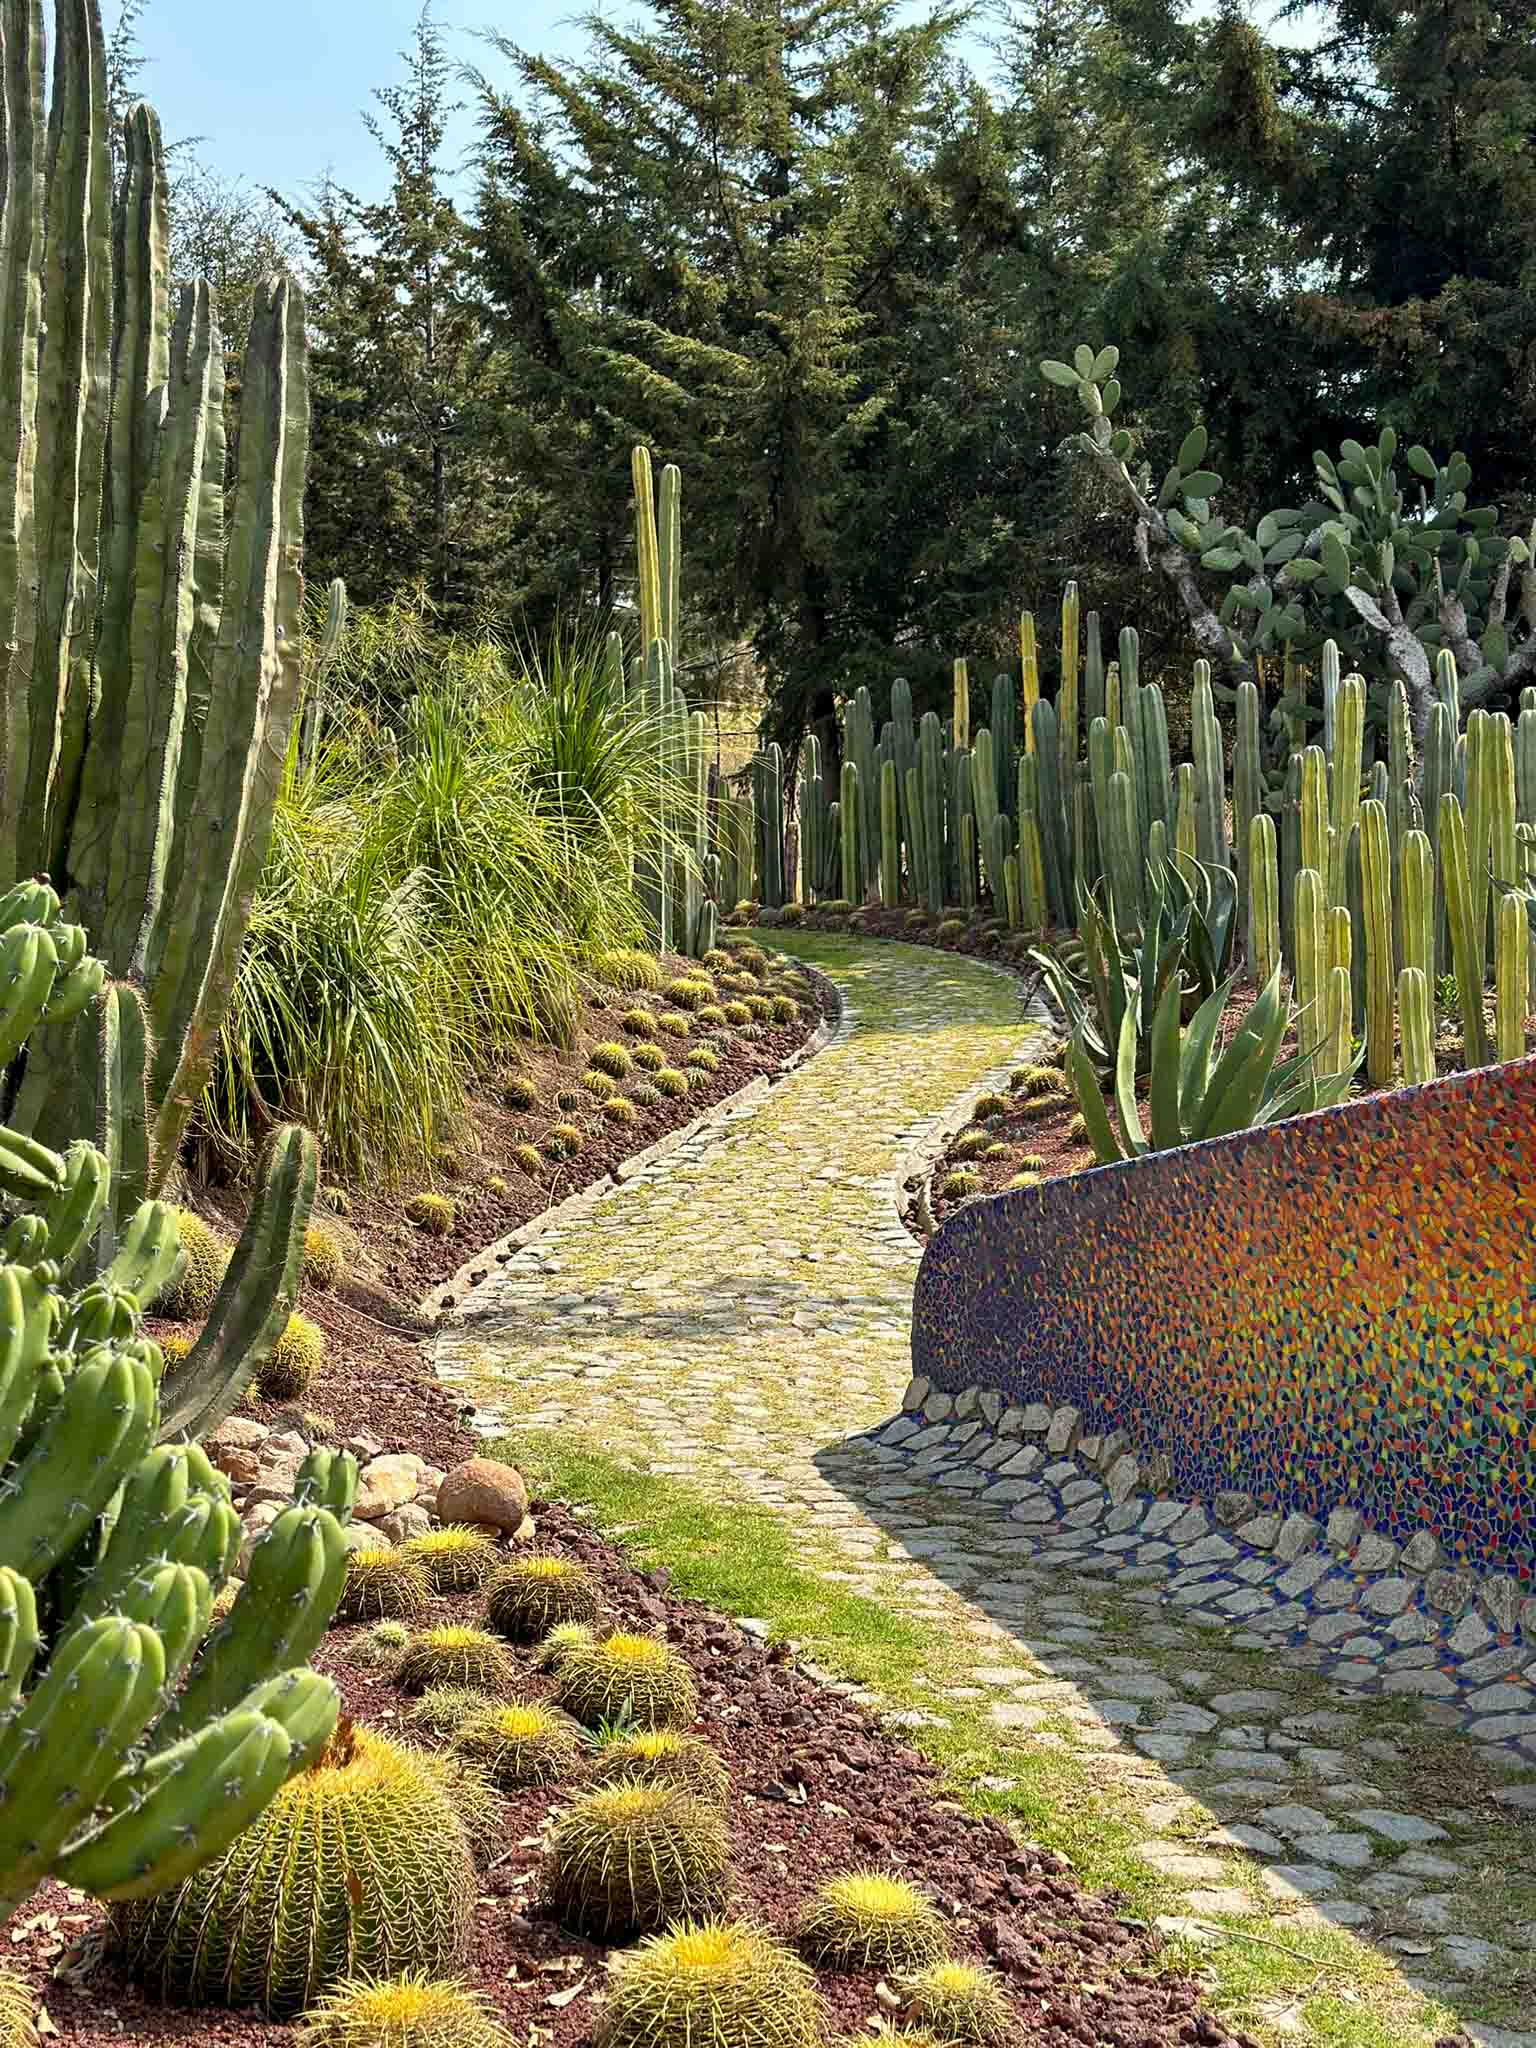 Pathway surrounded by colorful mosaic planters filled with cacti